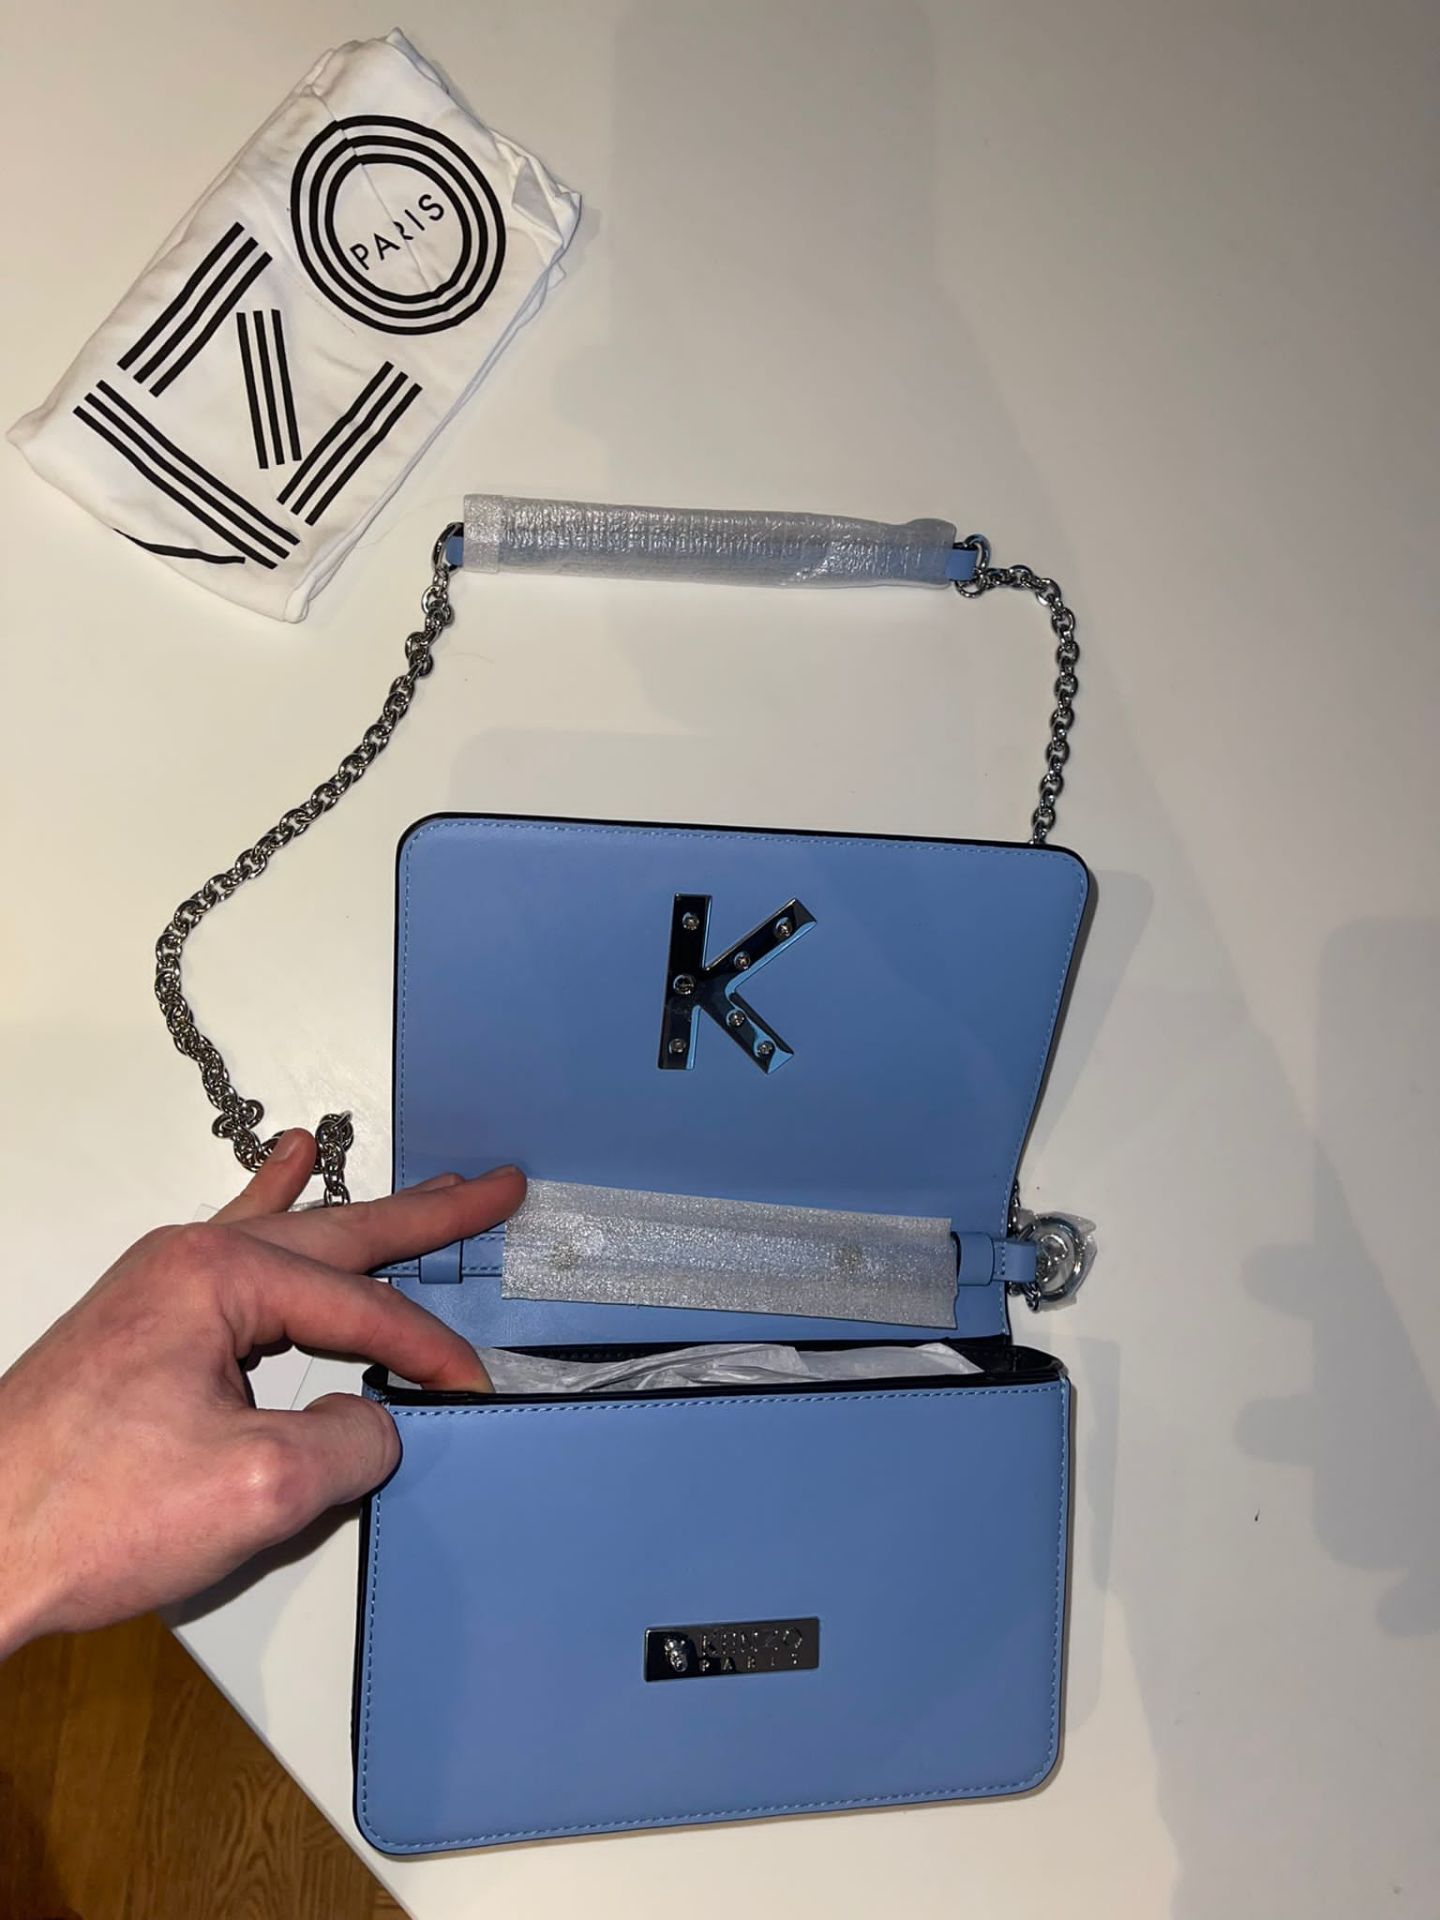 Kenzo Women's Chain Cross Body Bag. RRP £365.00. This Skyblue bag will be a trendsetter, with a - Image 2 of 3